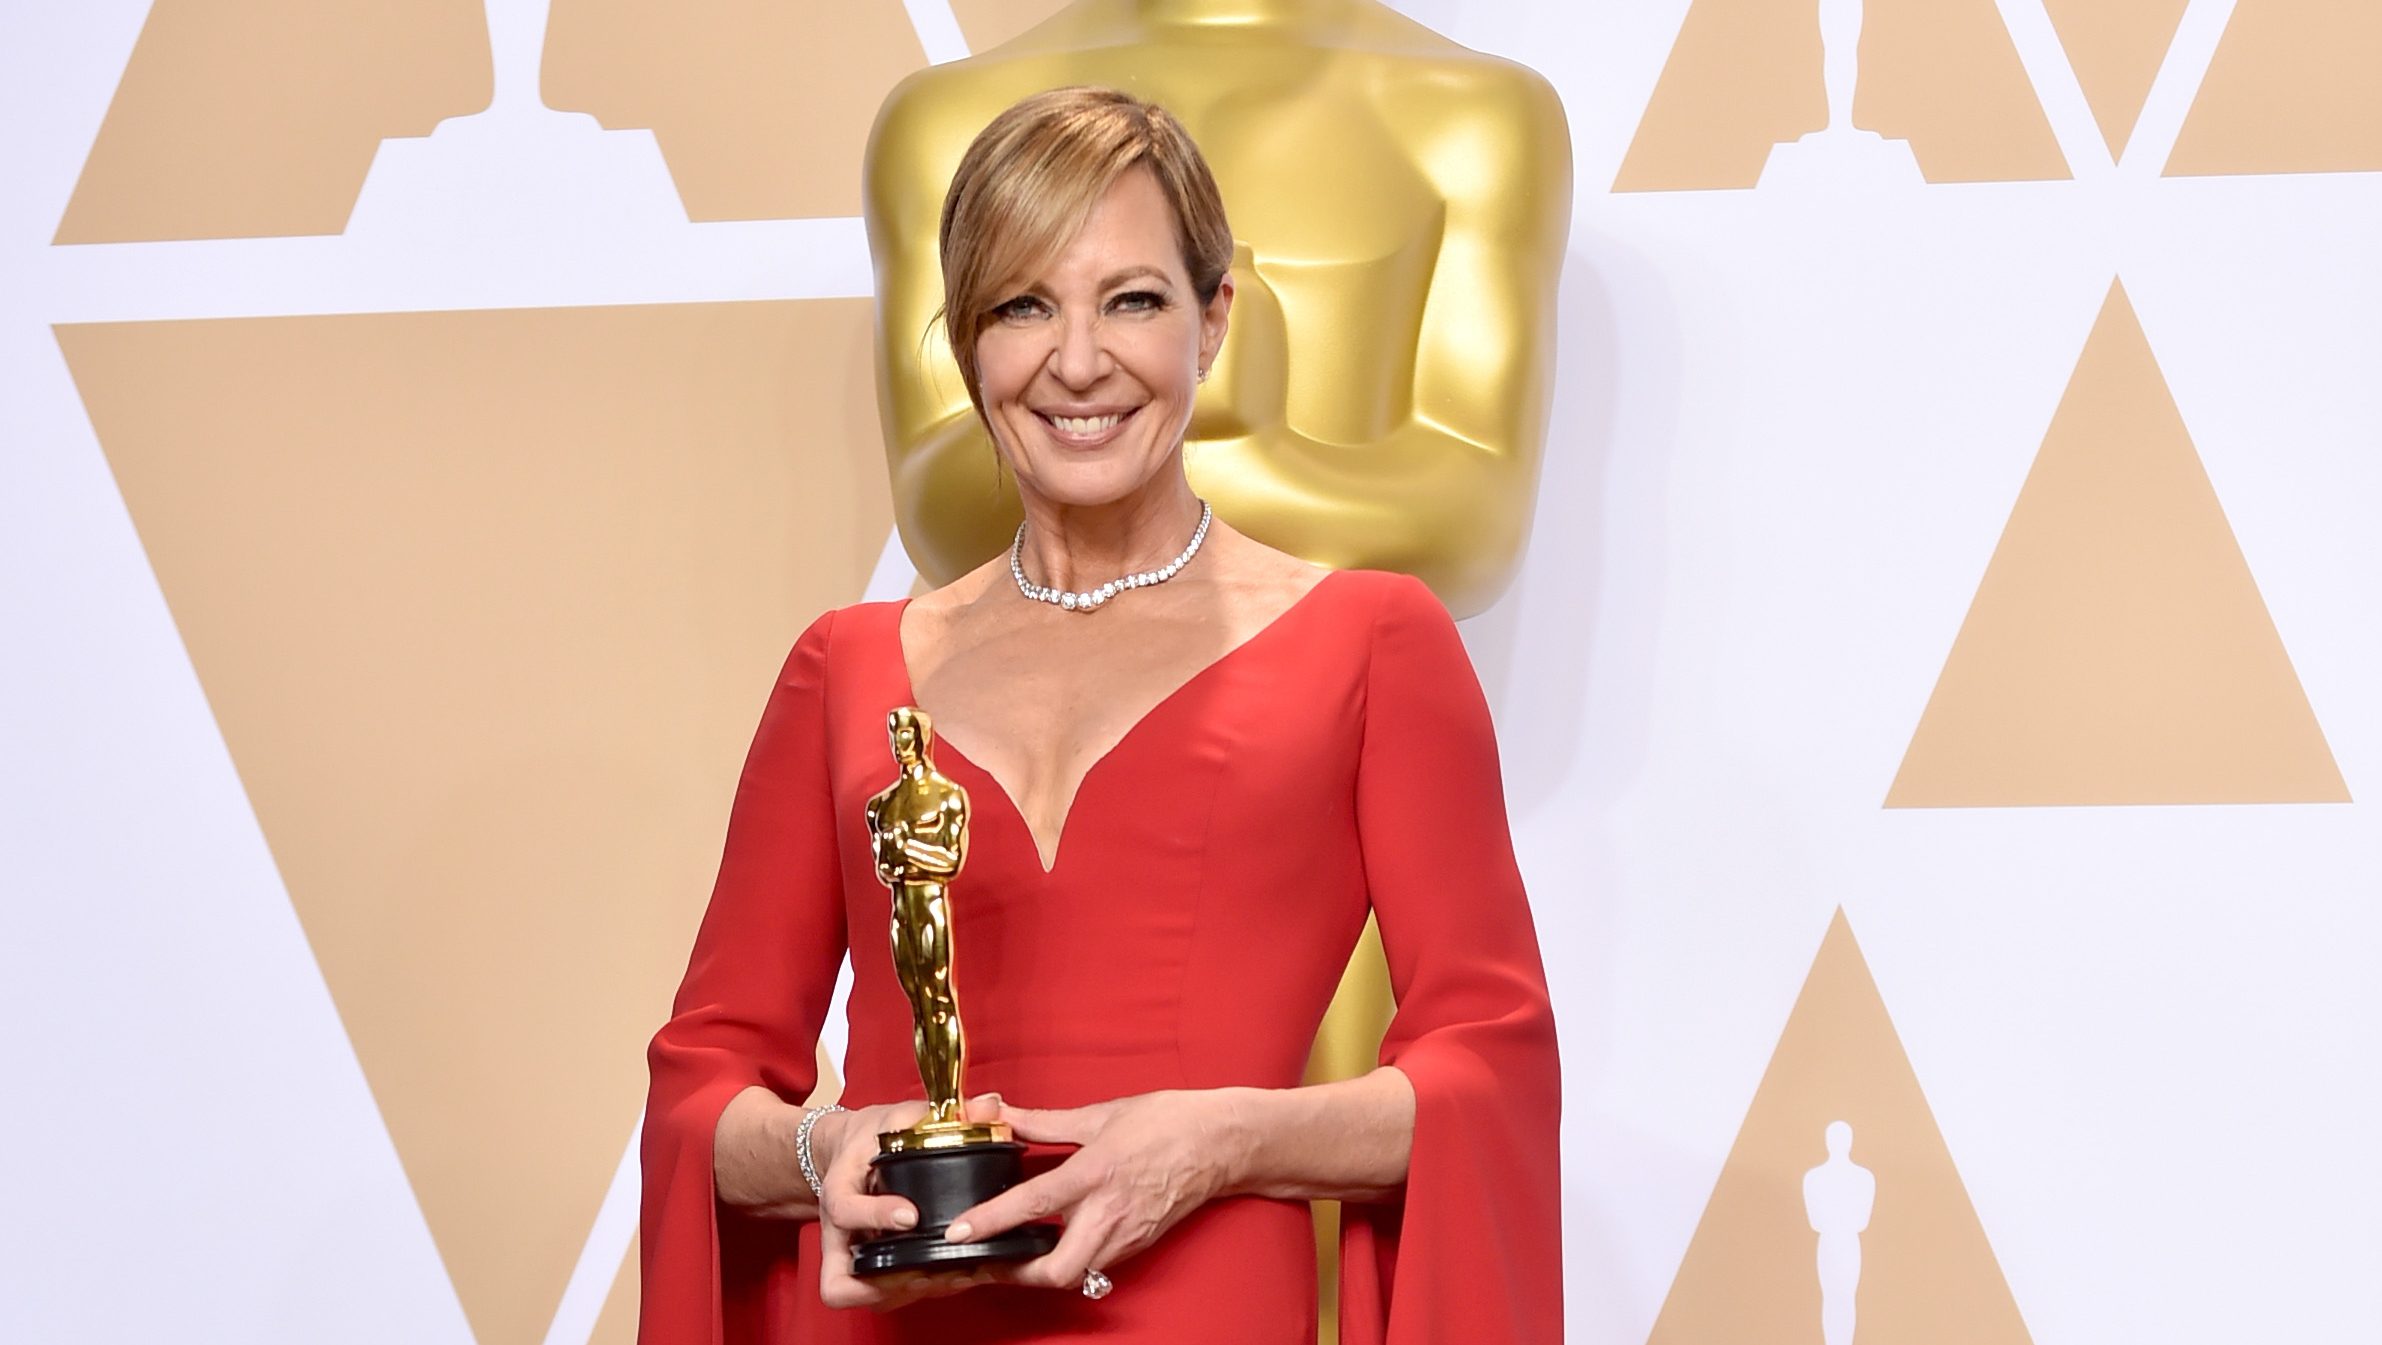 Allison Janney celebrated for her accomplishments in movies and TV shows, 2018